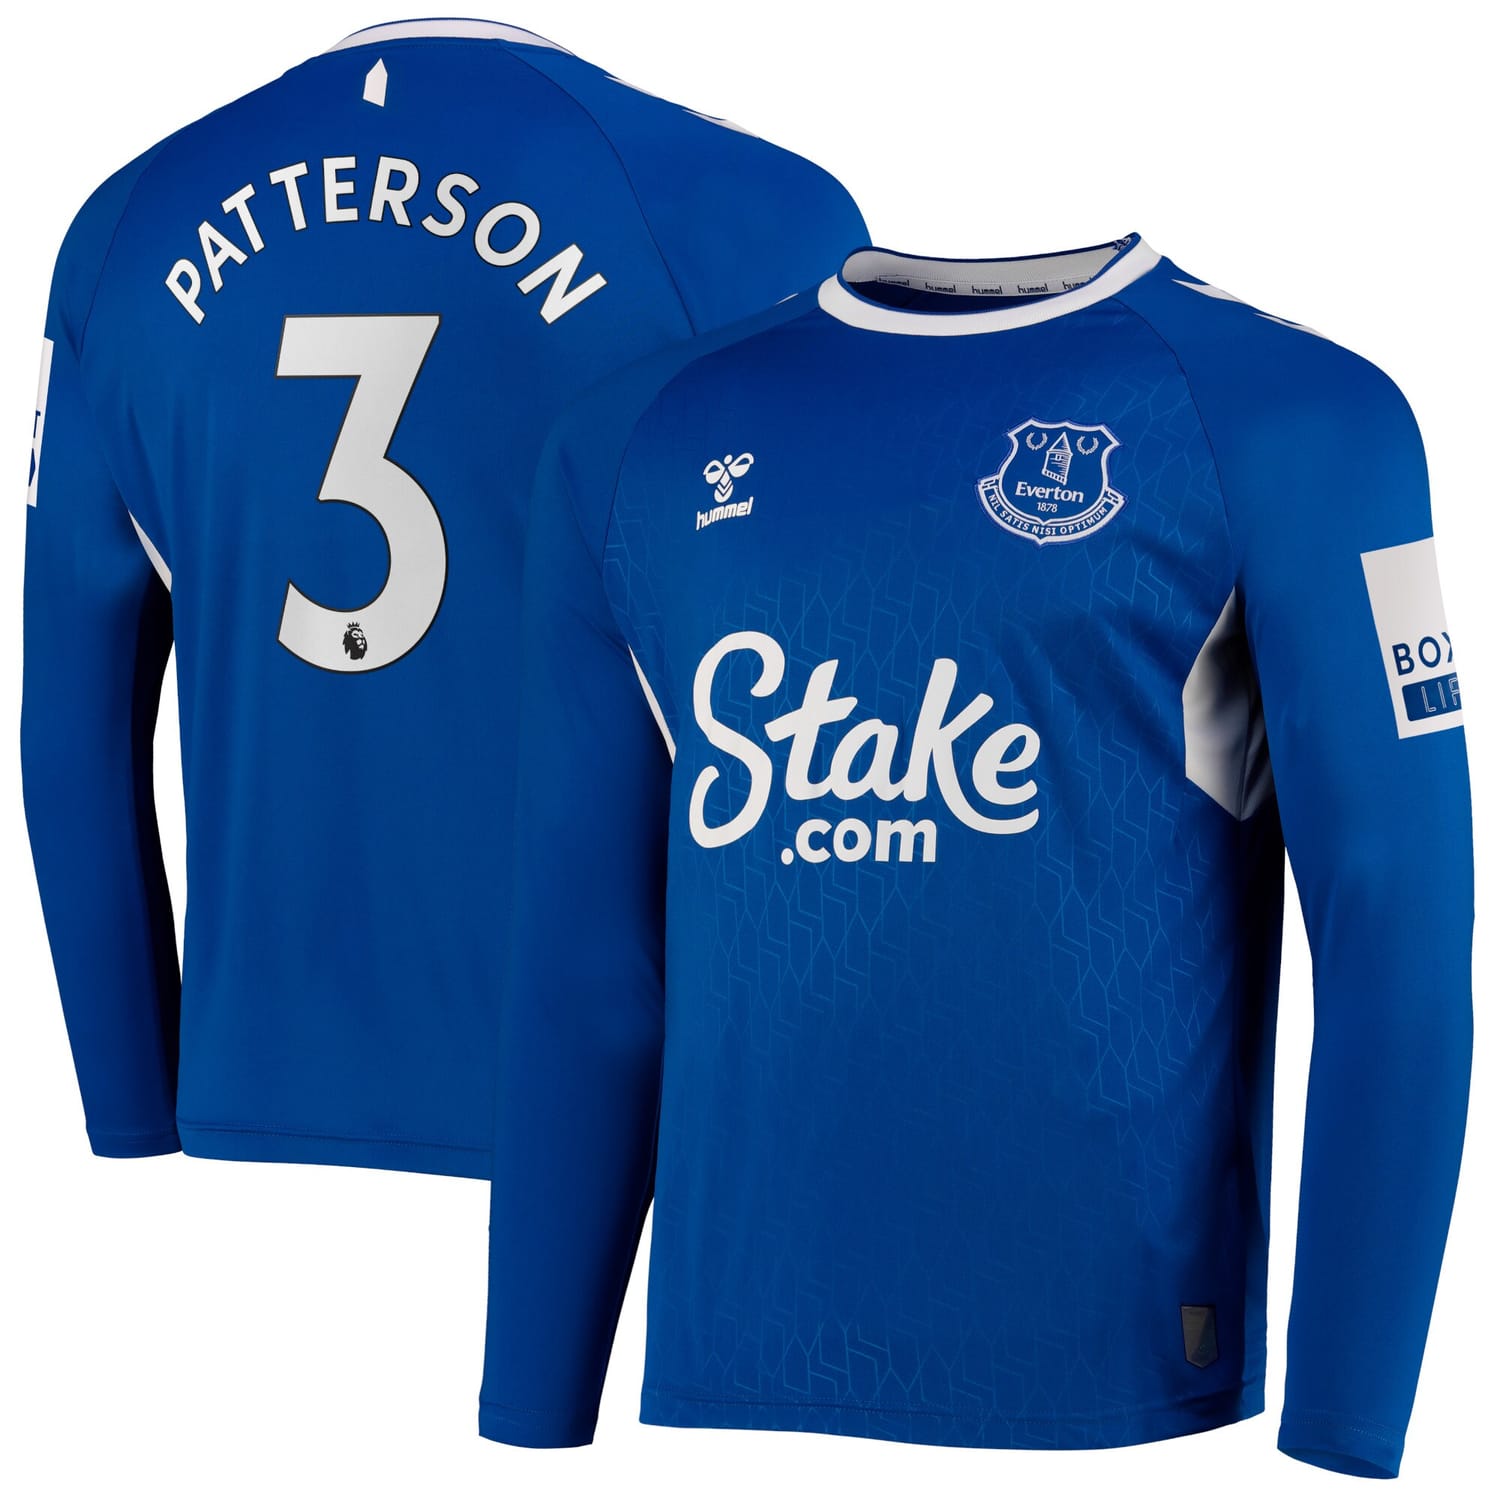 Premier League Everton Home Jersey Shirt Long Sleeve 2022-23 player Nathan Patterson 3 printing for Men